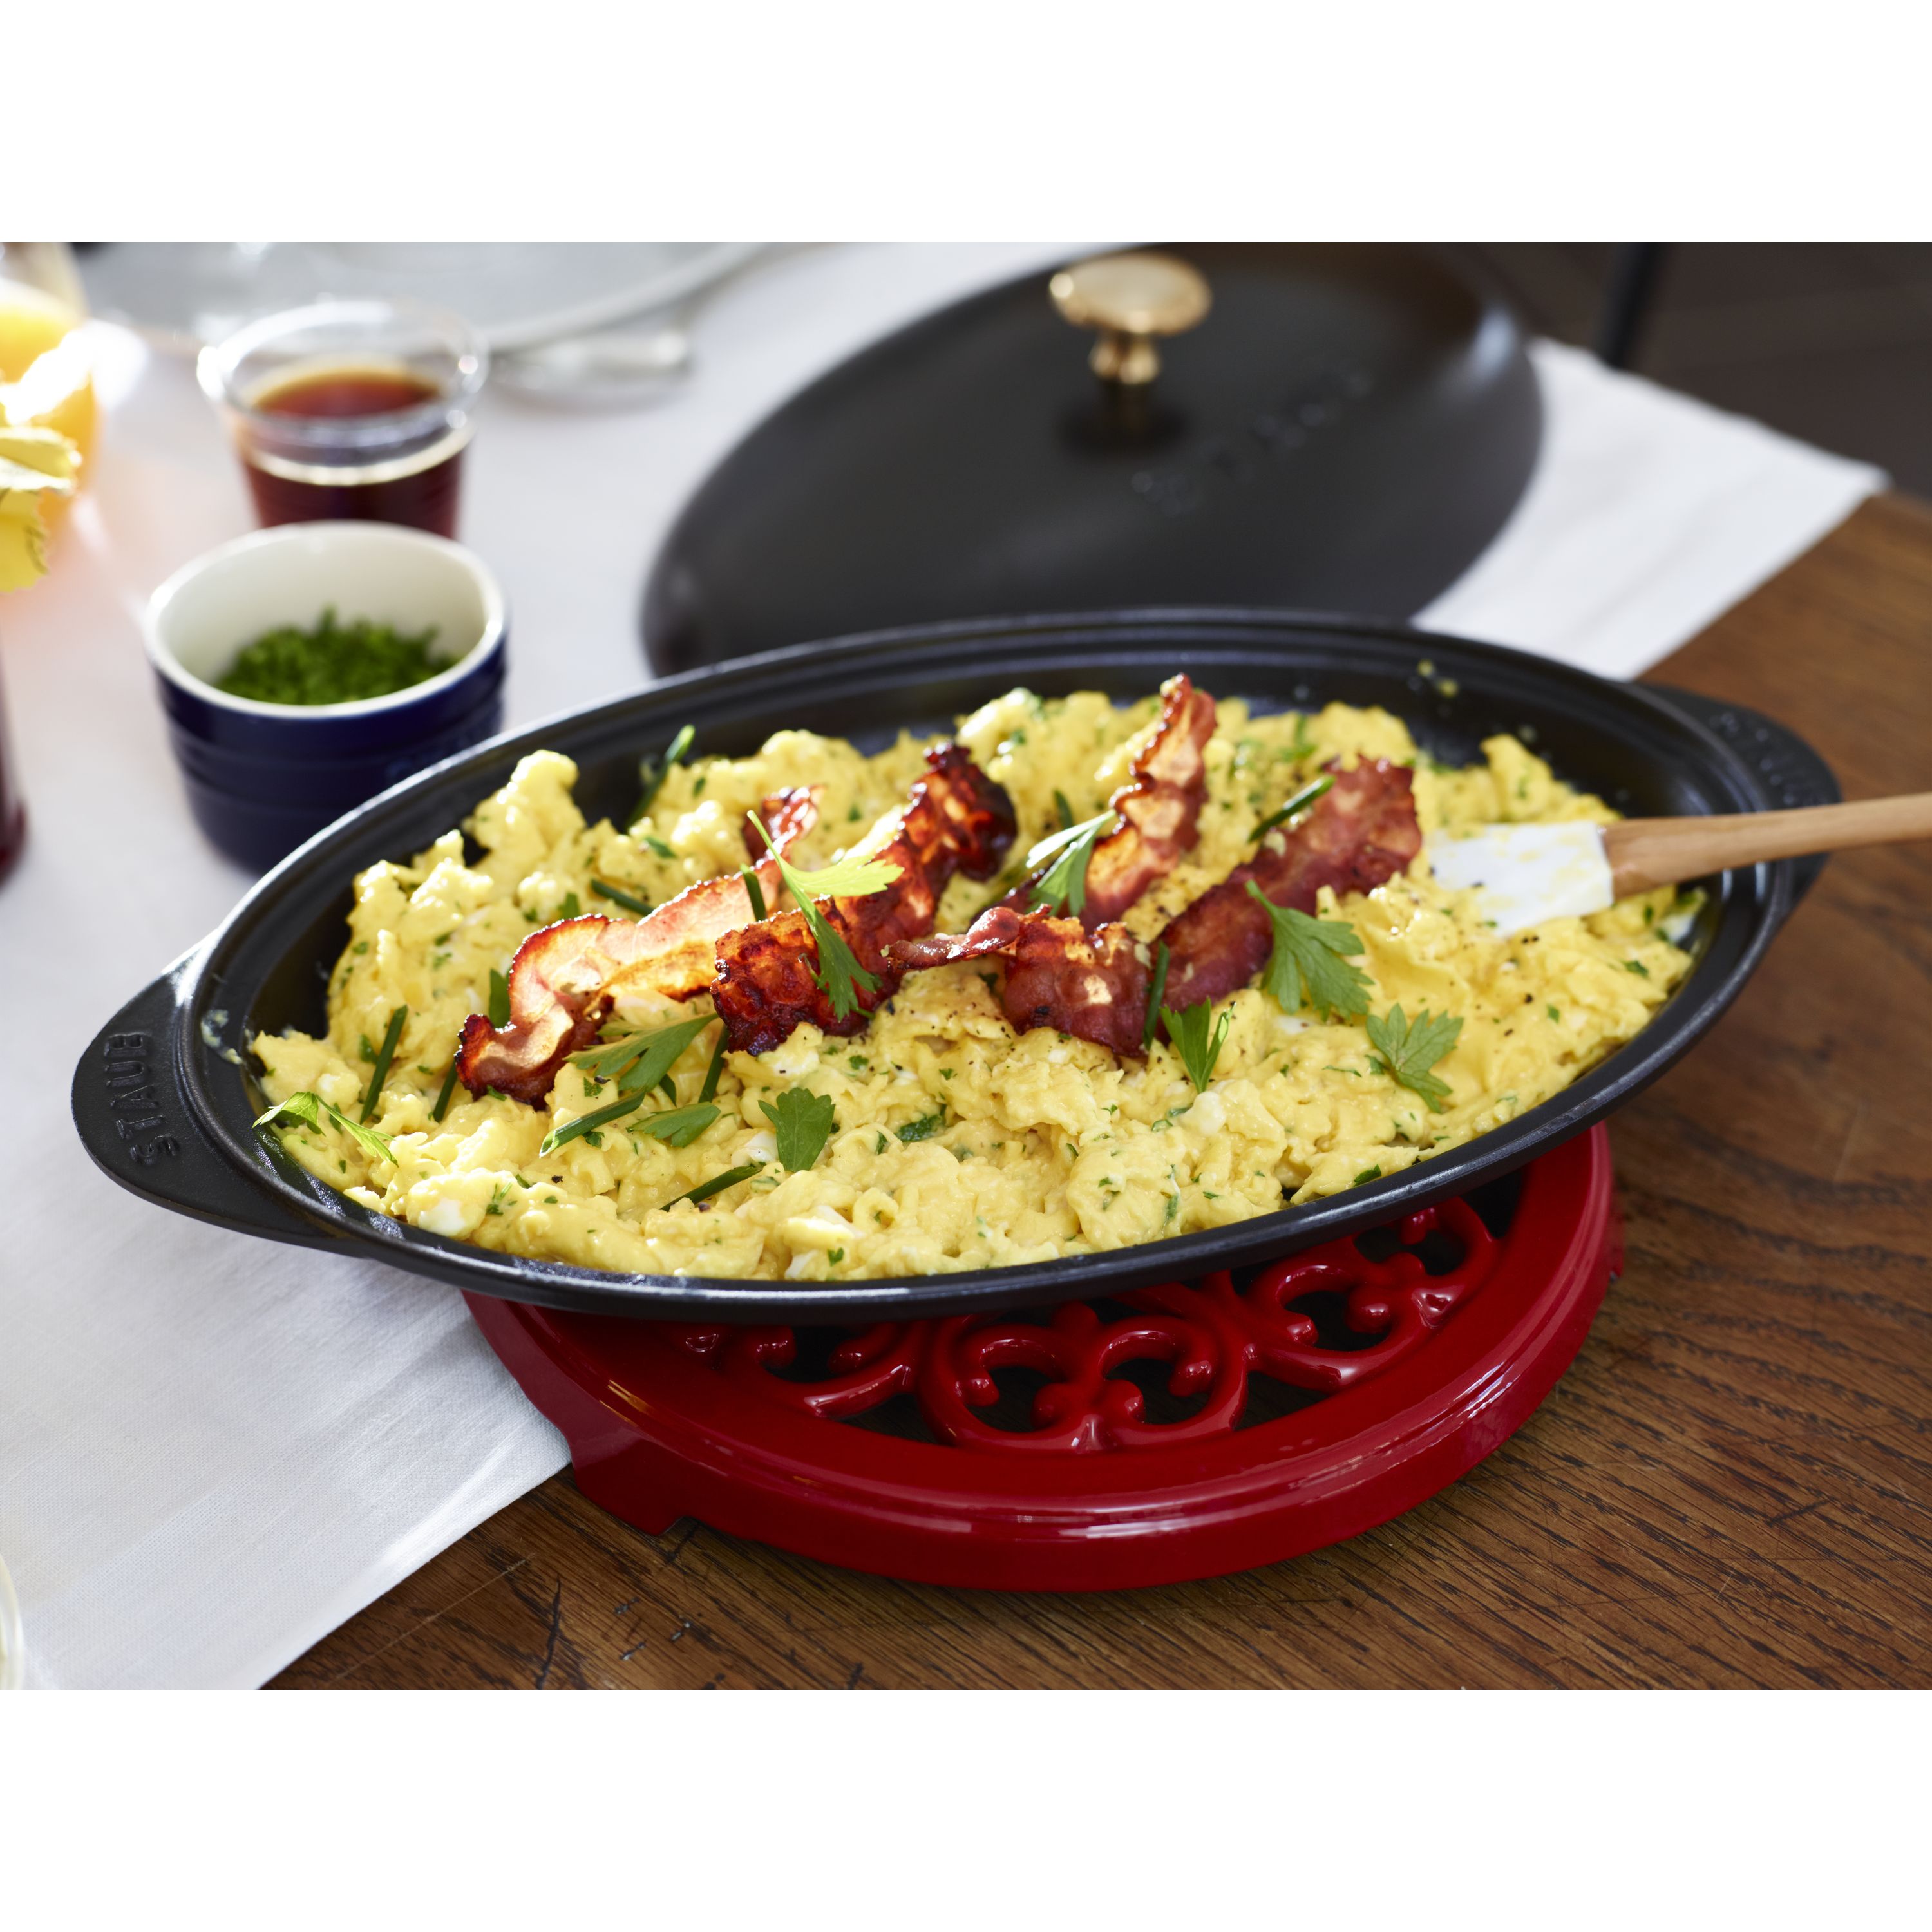 Buy Staub Cast Iron - Specialty Items Oven dish with lid